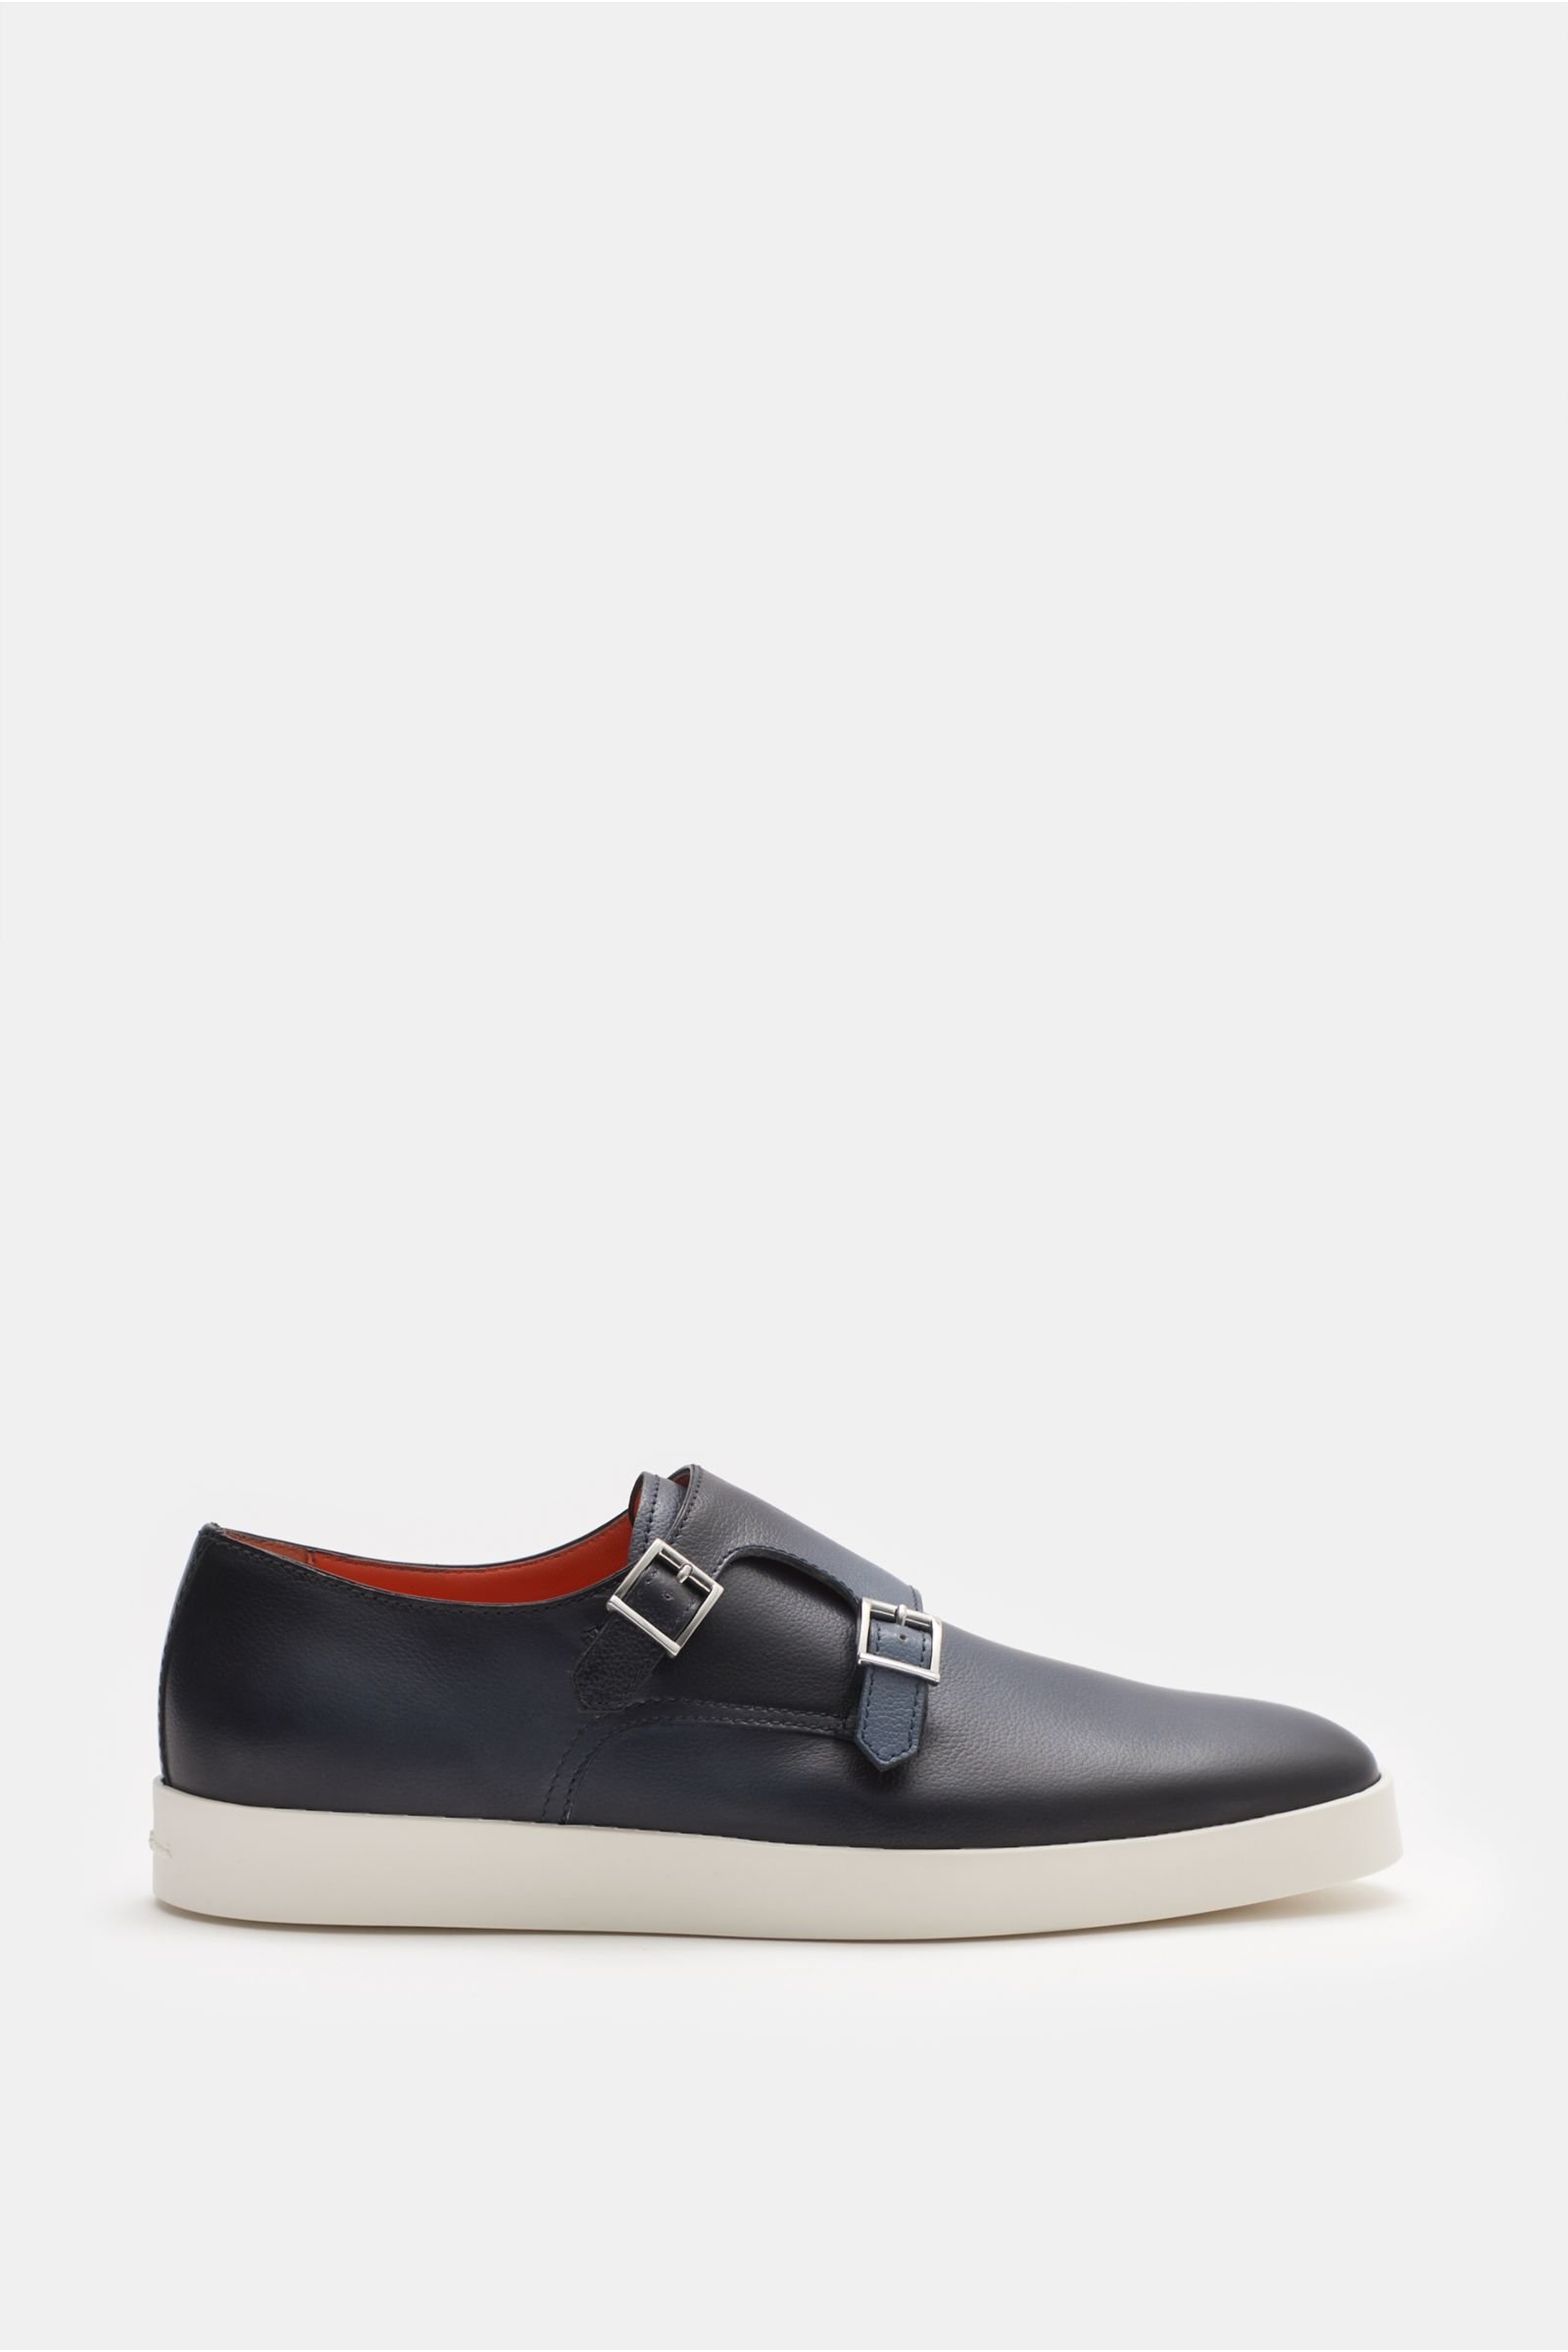 Double monk shoes navy